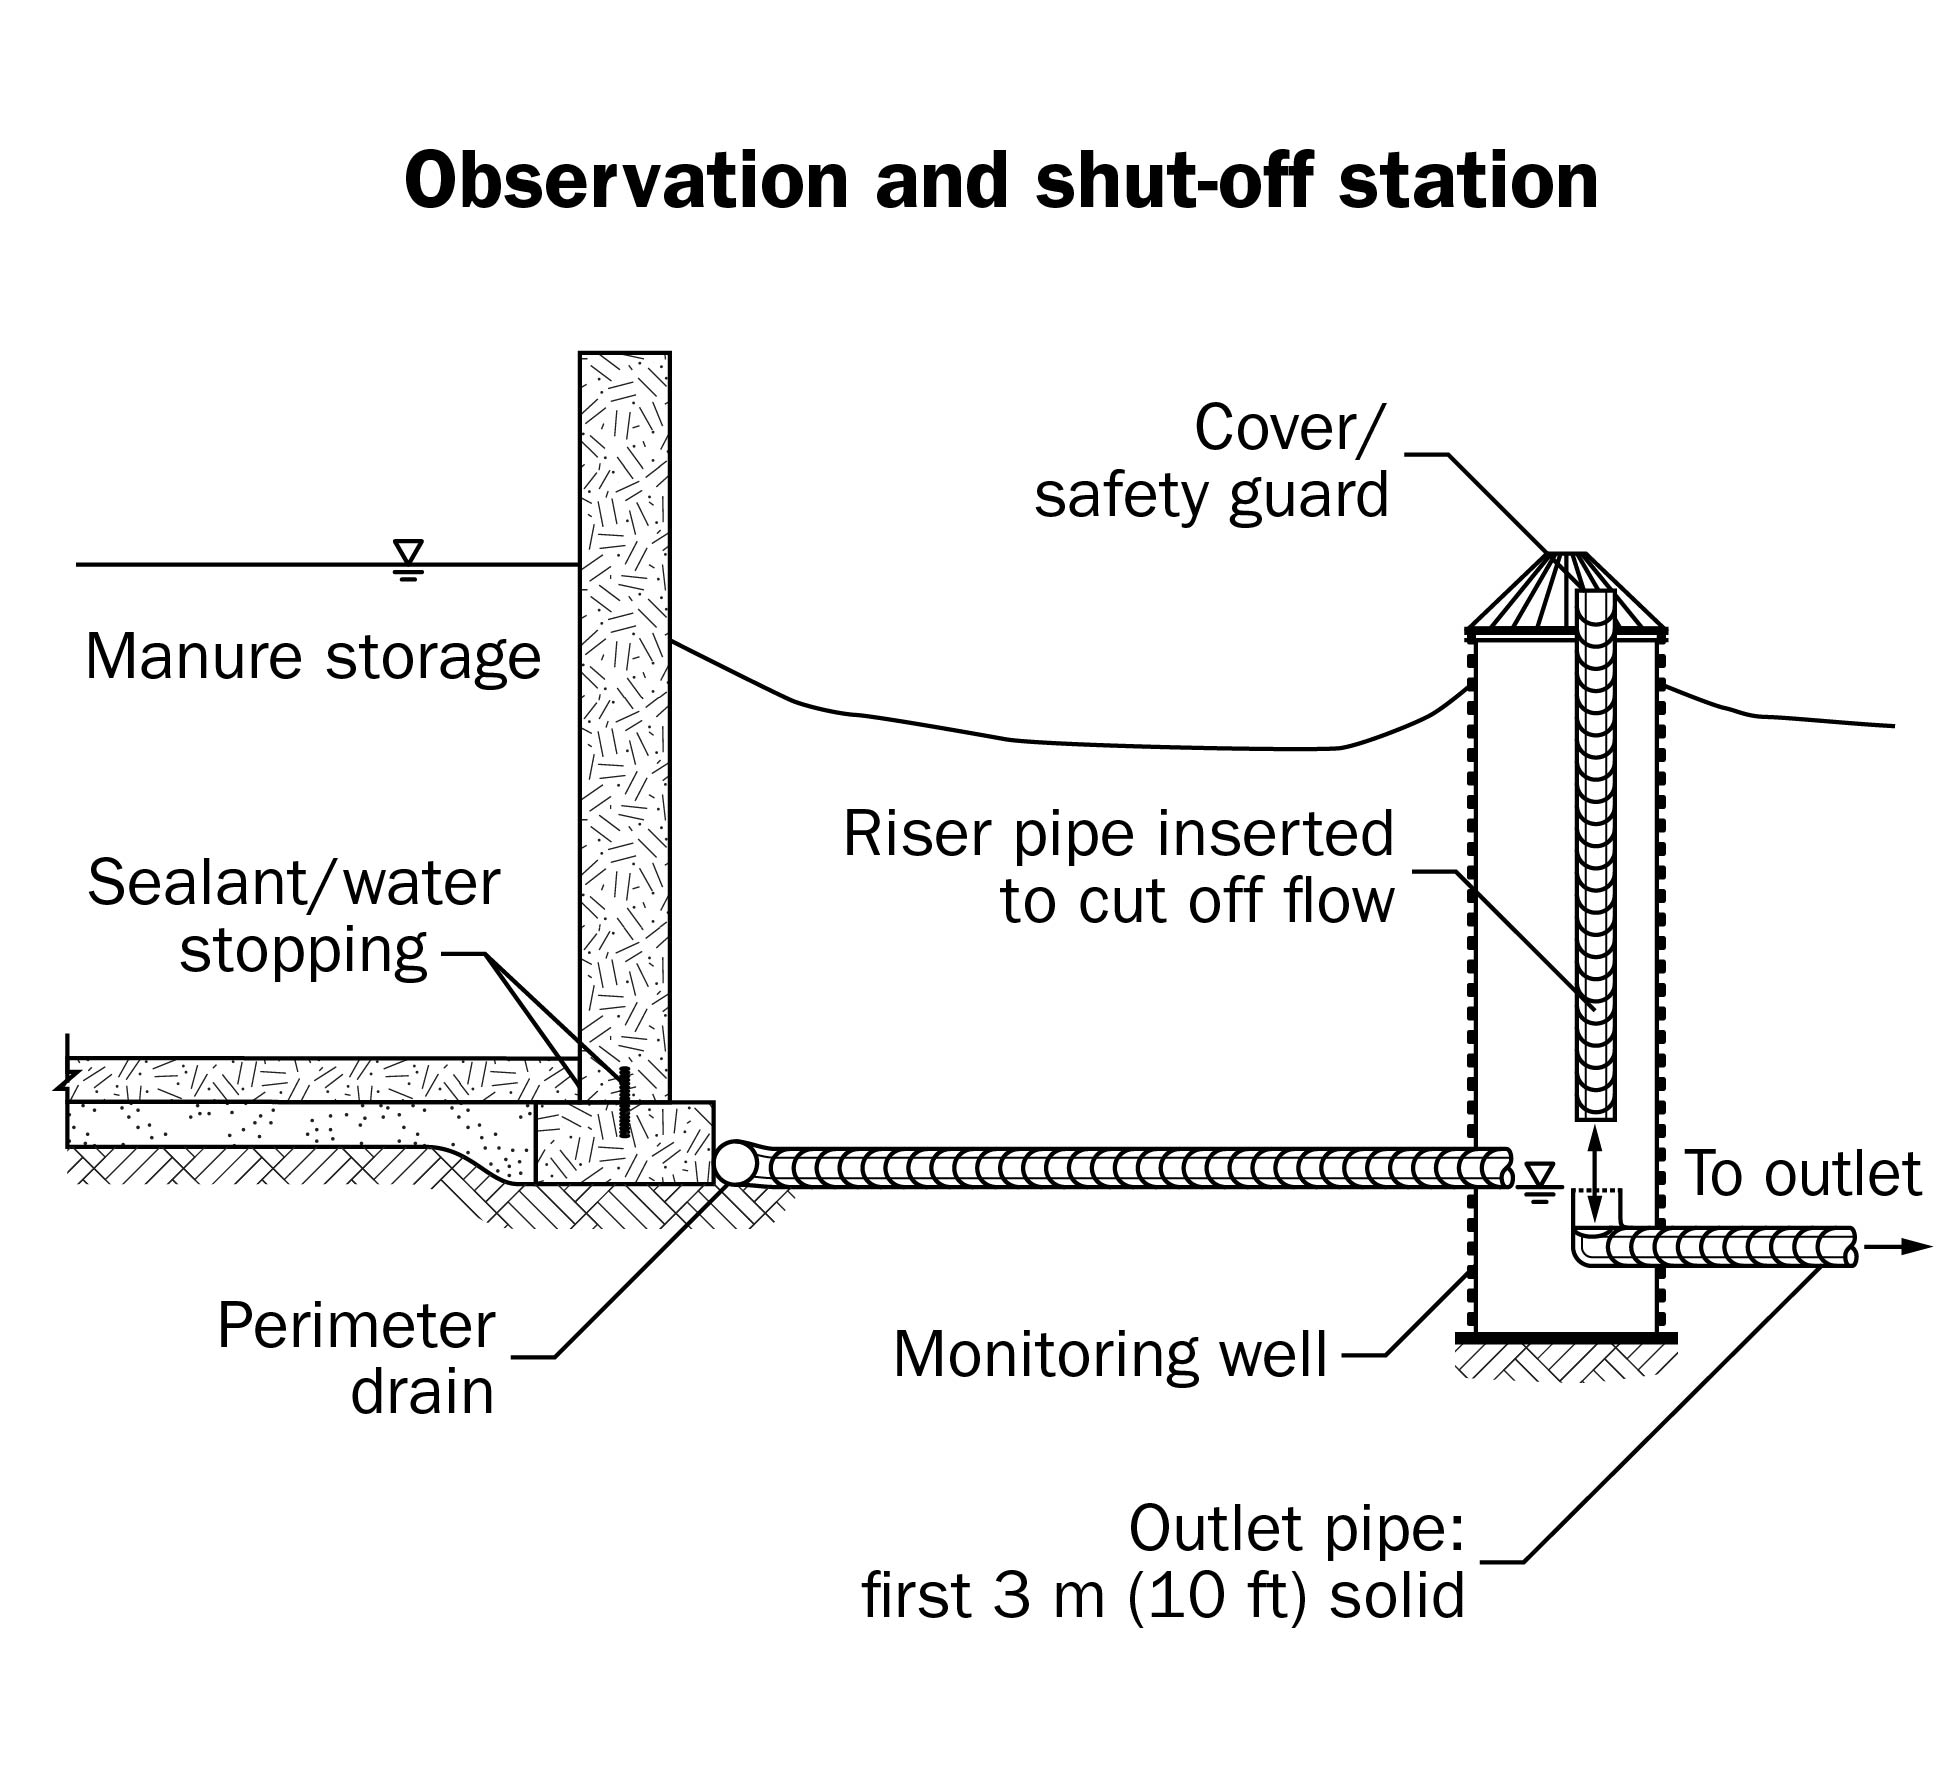 A drawing that shows where to place an observation and shut-off station in order to provide access to a perimeter drain. The placement of the observation shut-off allows for identifying contaminated flow, stopping its movement and fixing the situation.